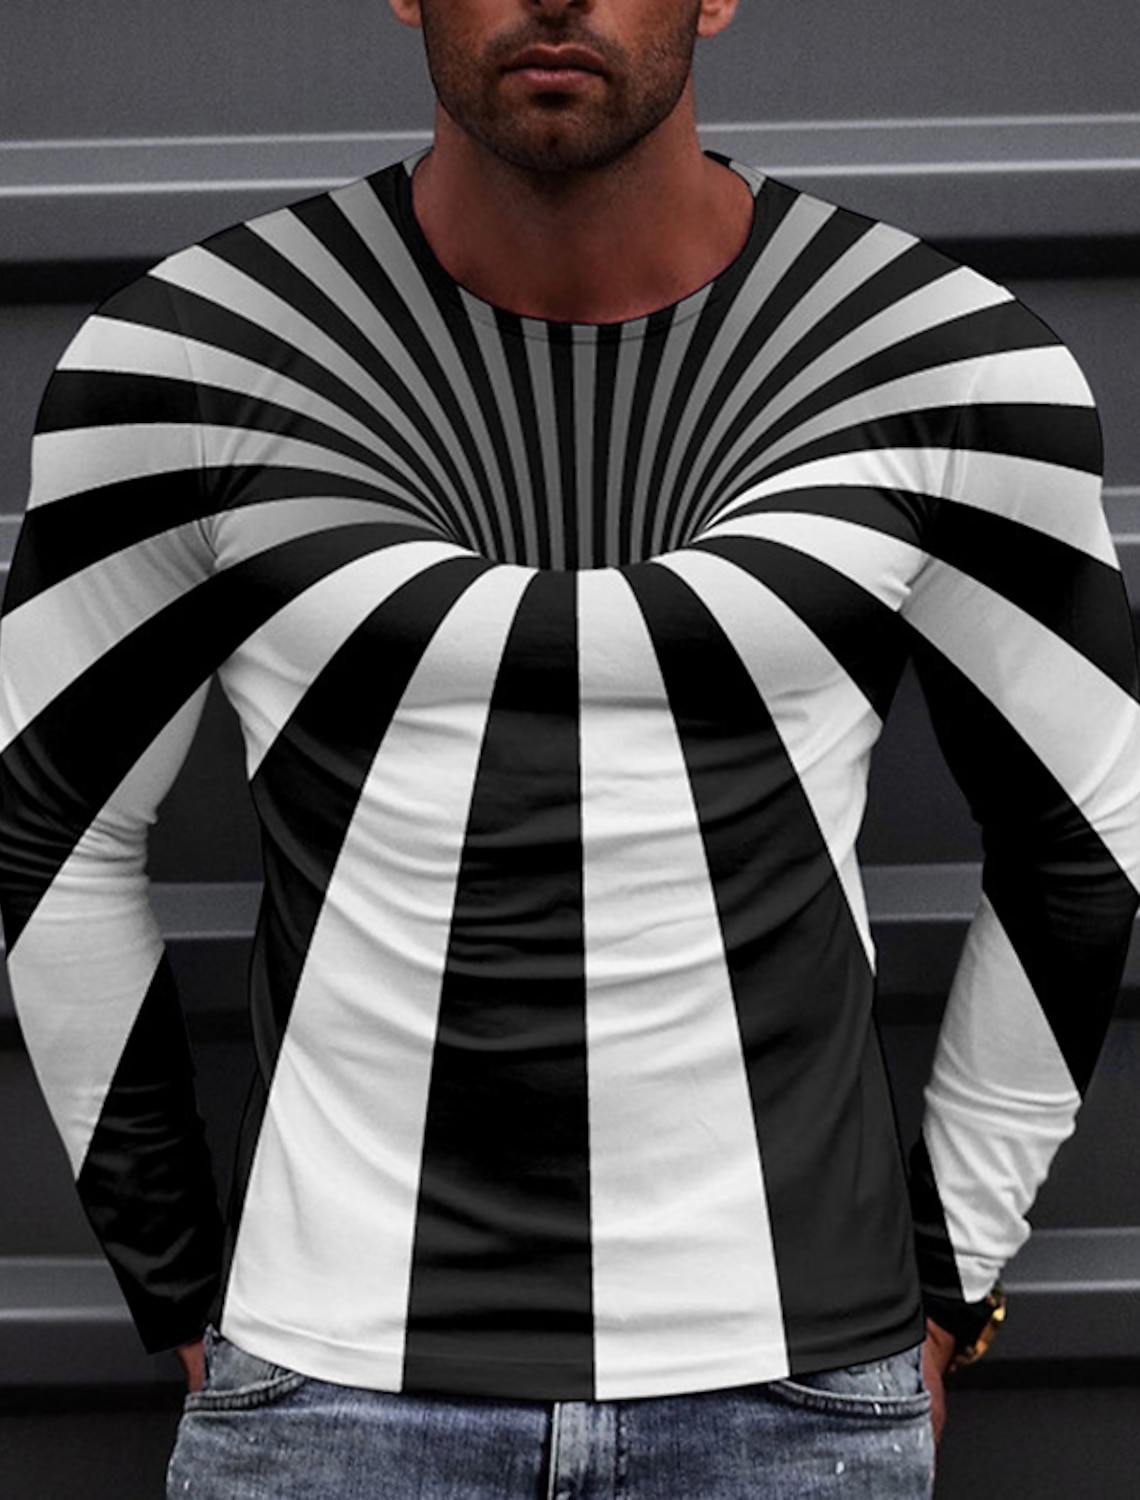 Men's 3D Graphic T-Shirt Long Sleeve Daily Tops Round Neck Black/White 